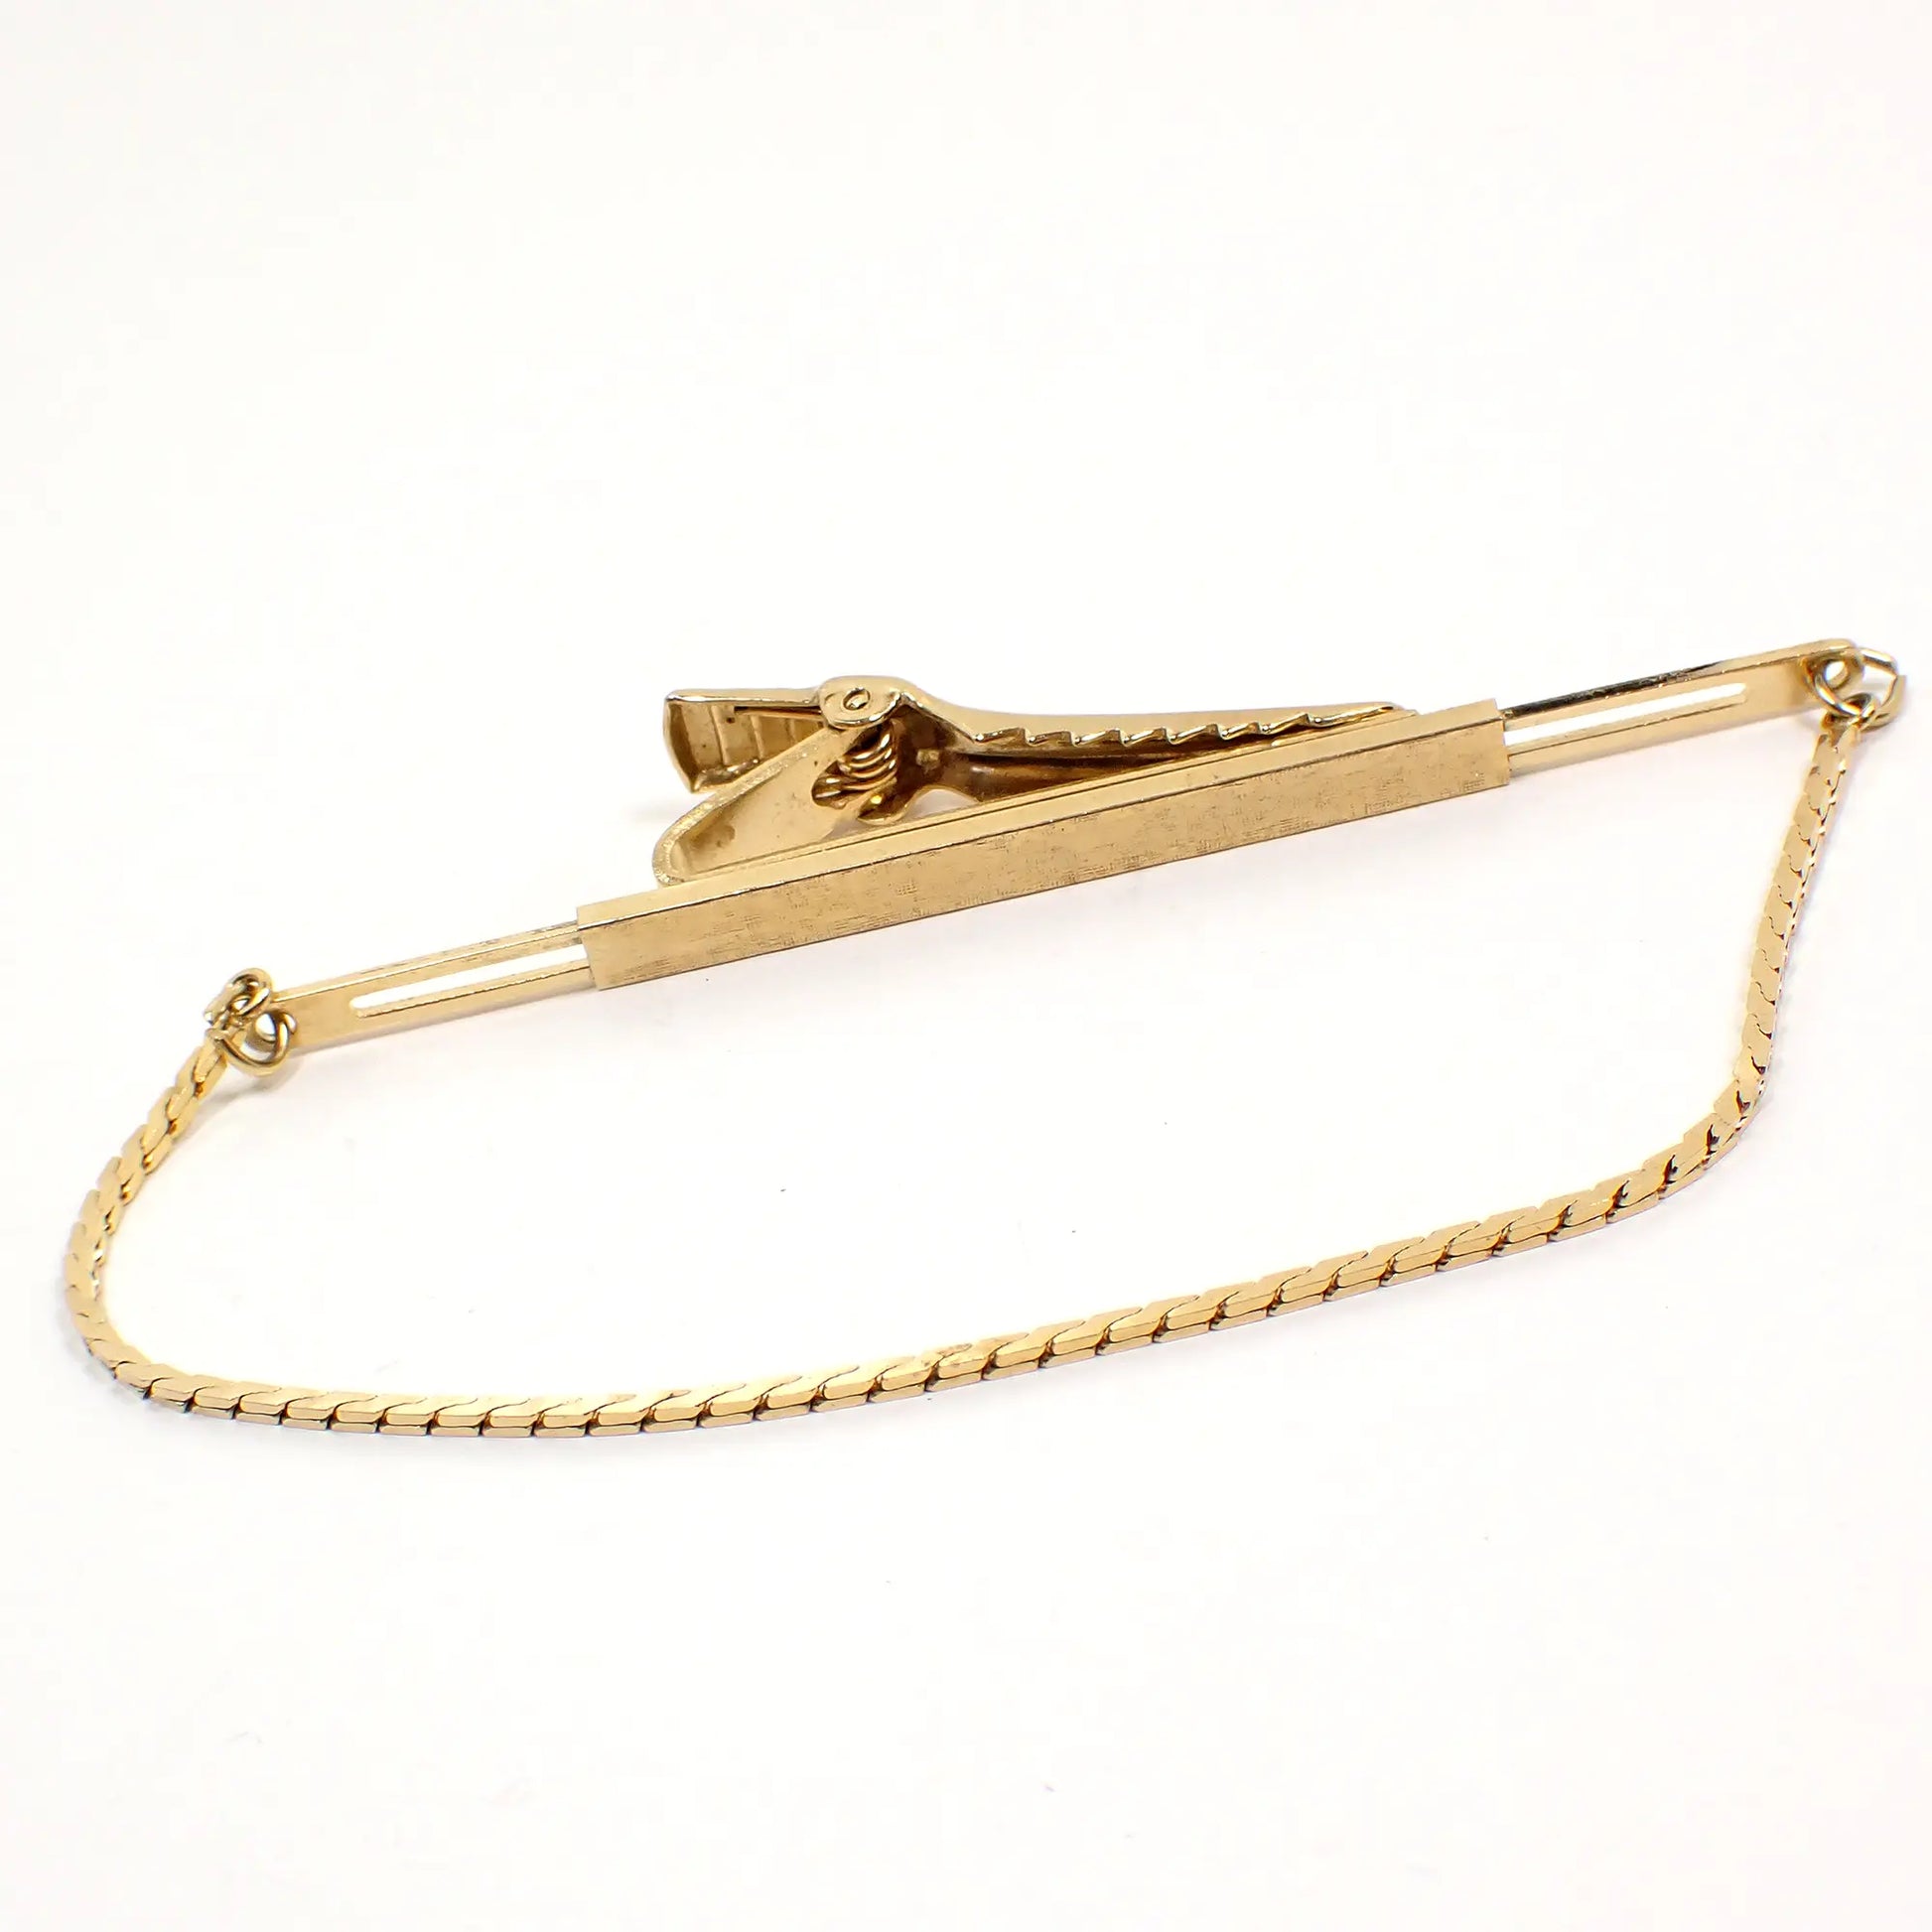 View of the Anson Mid Century vintage tie chain clip clasp with both sides slid all the way out to show the adjustable sides.